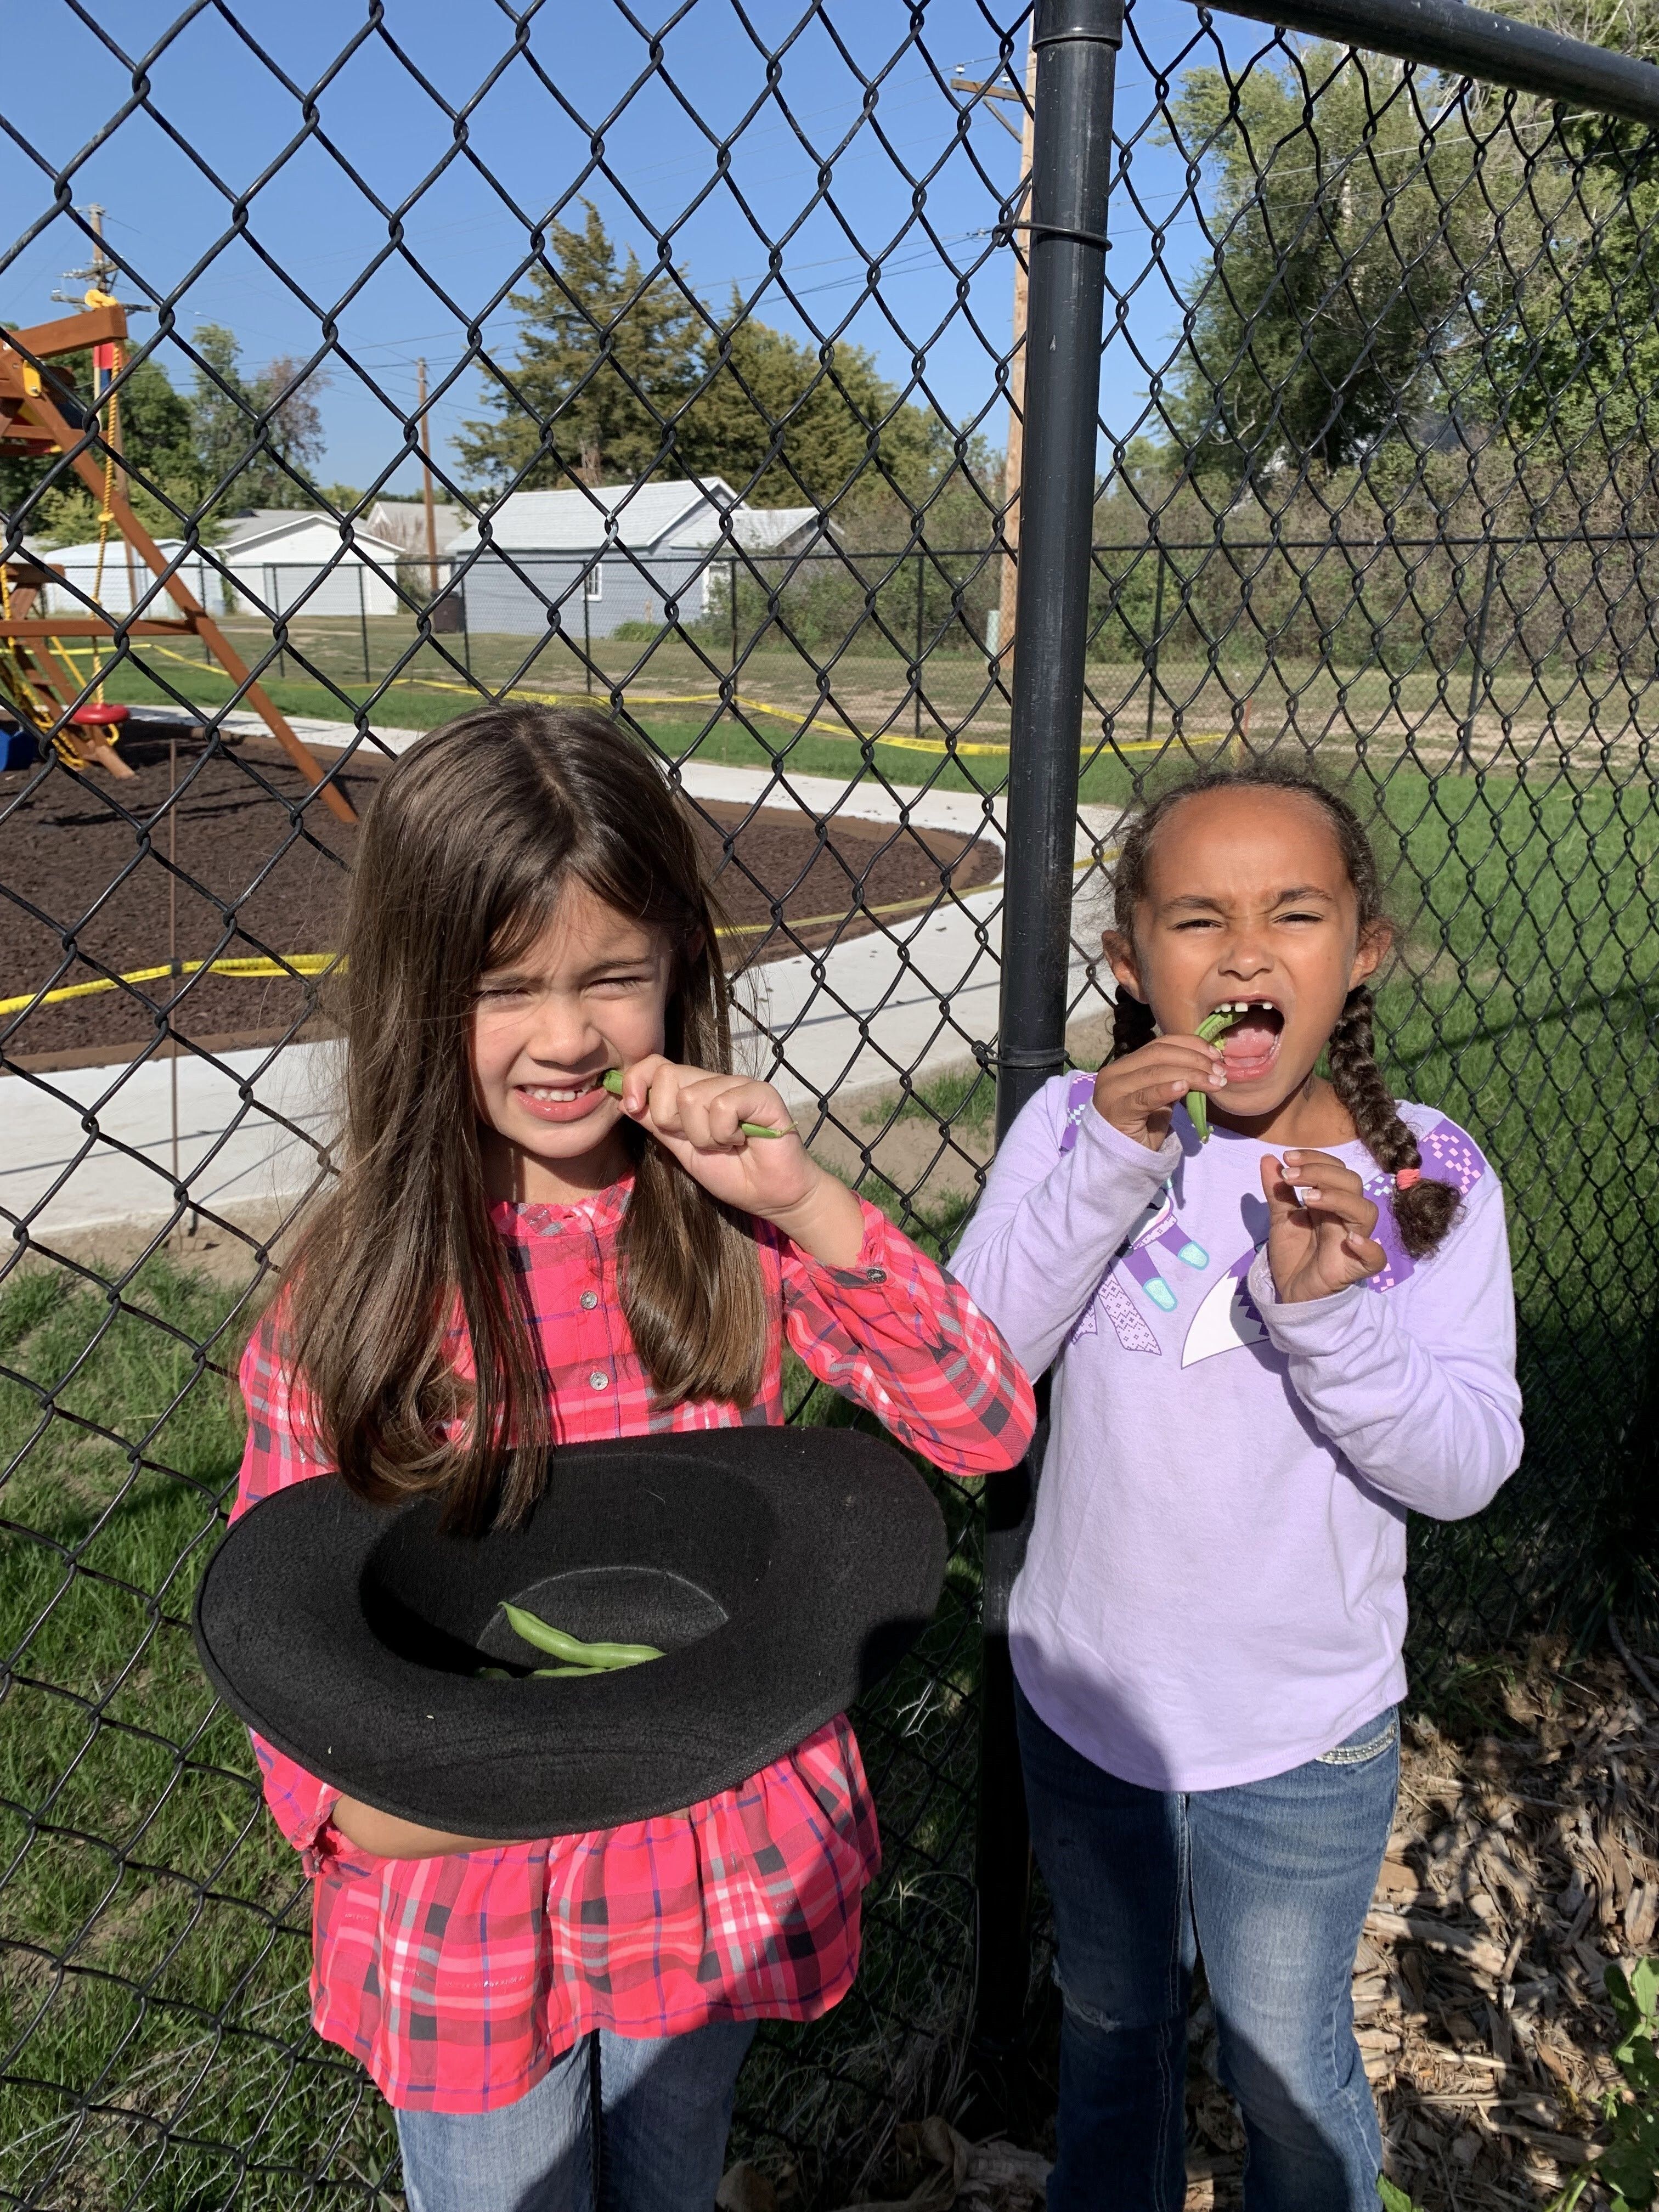 A Land of Weird Potatoes: The Valley Child Development Center Awarded $25,000 Grant to Continue Enhancing Edible Schoolyard Project